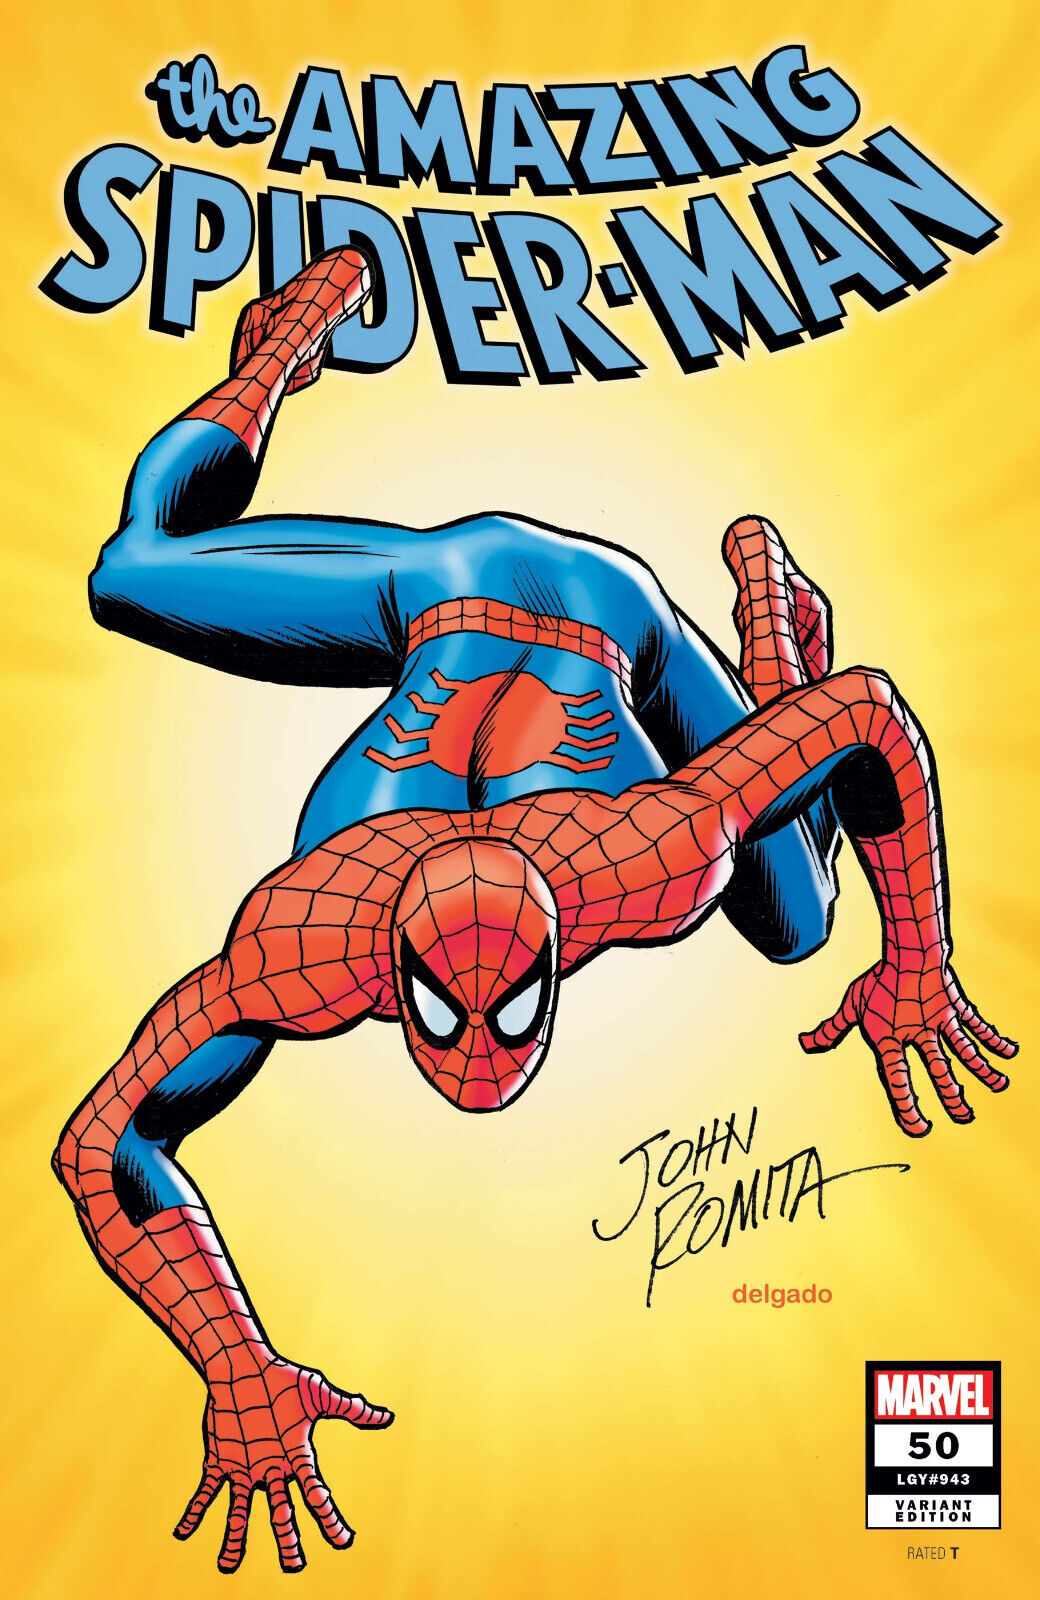 Amazing Spider-Man #50 Cover by JOHN ROMITA SR 1:50 Incentive Variant